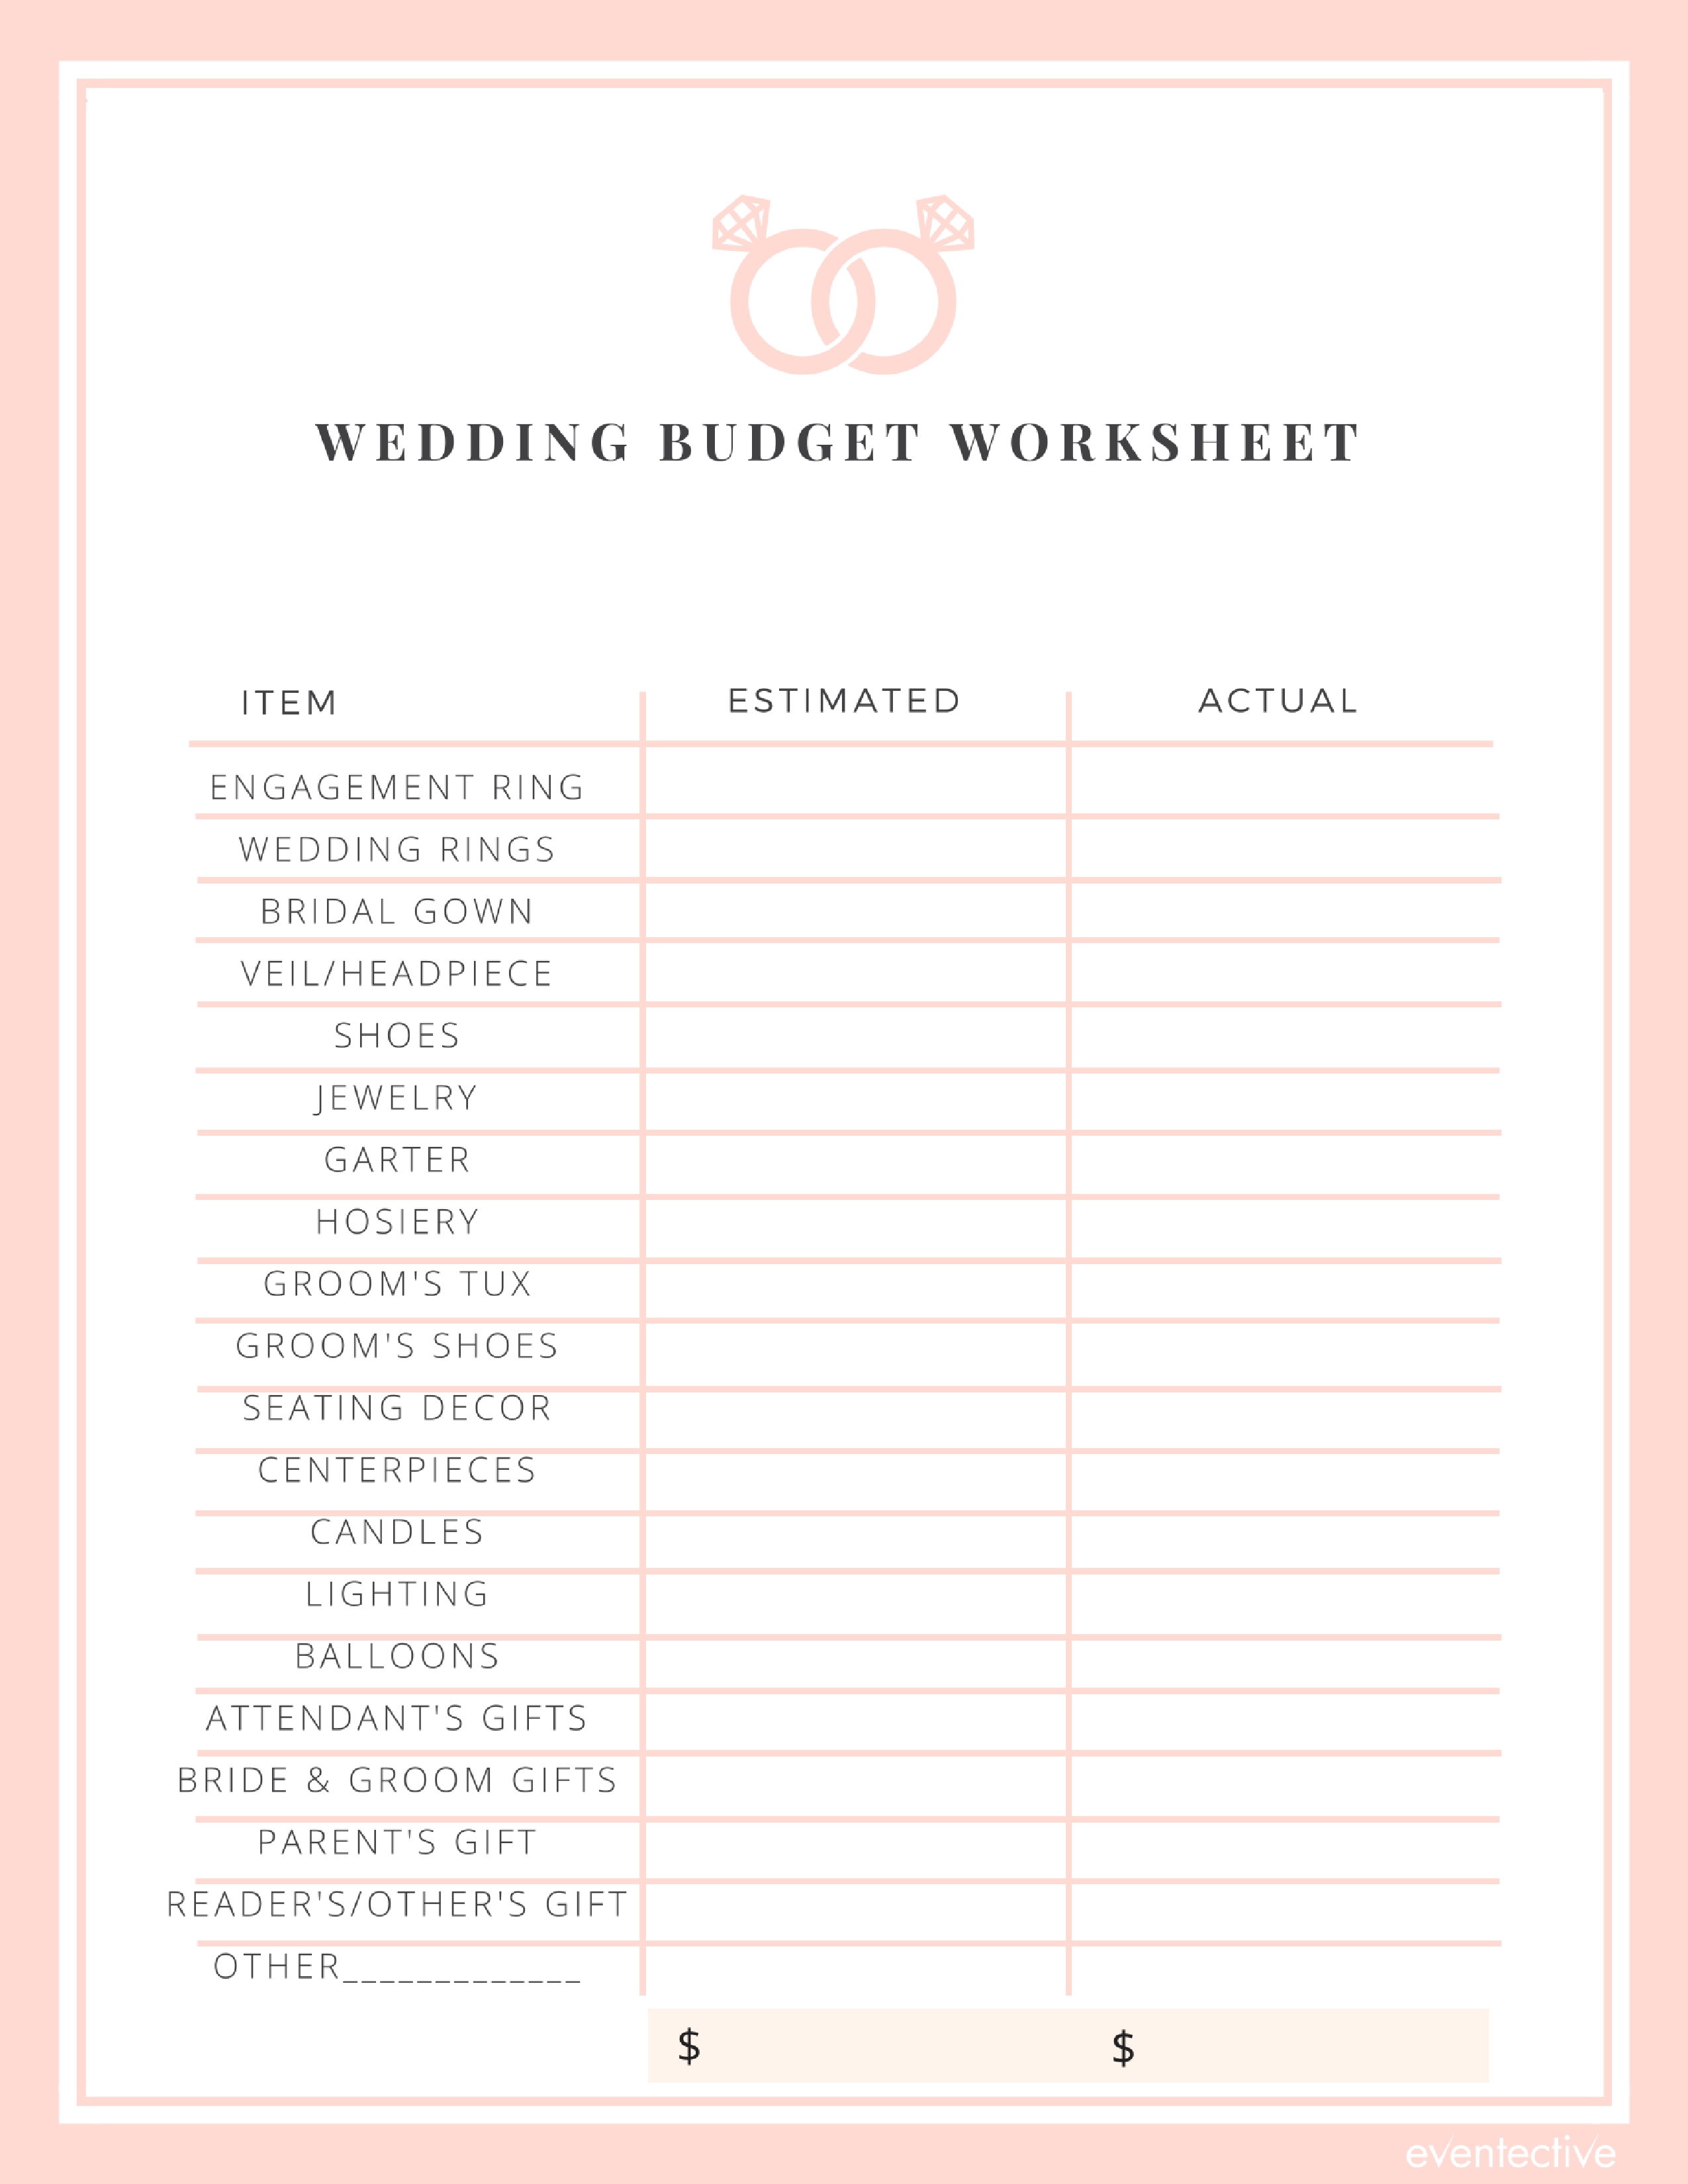 Wedding Budget Worksheet - Cheers and Confetti Blog by Eventective